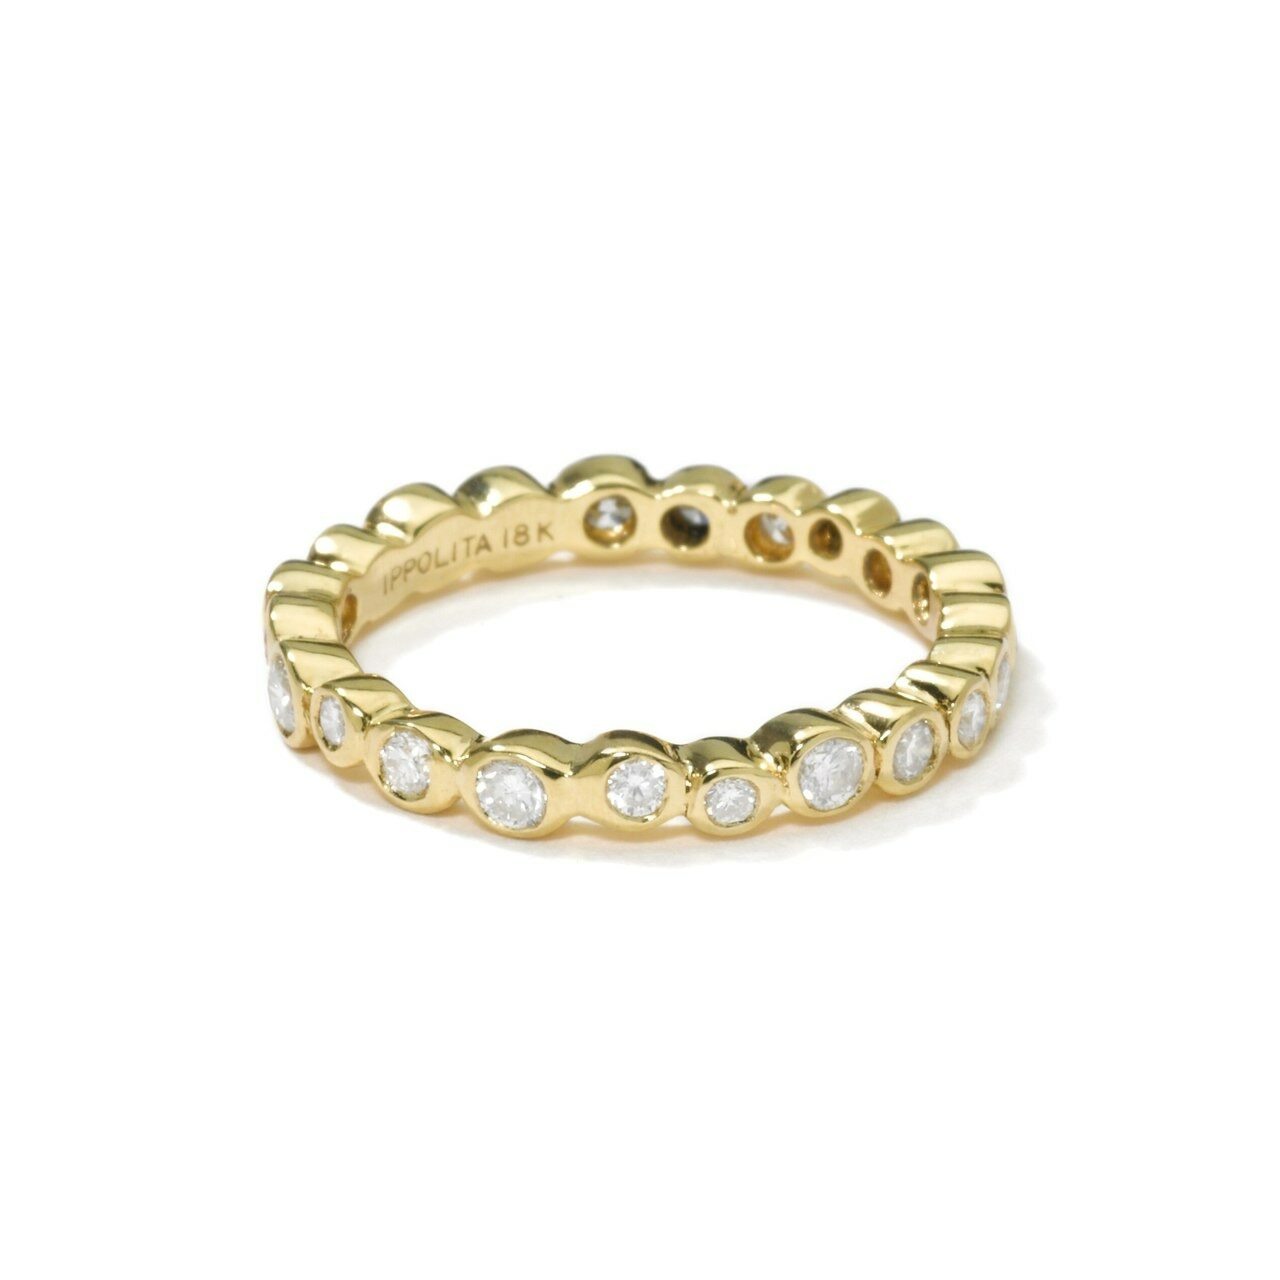 Starlet Band Ring in 18K Gold with Diamonds